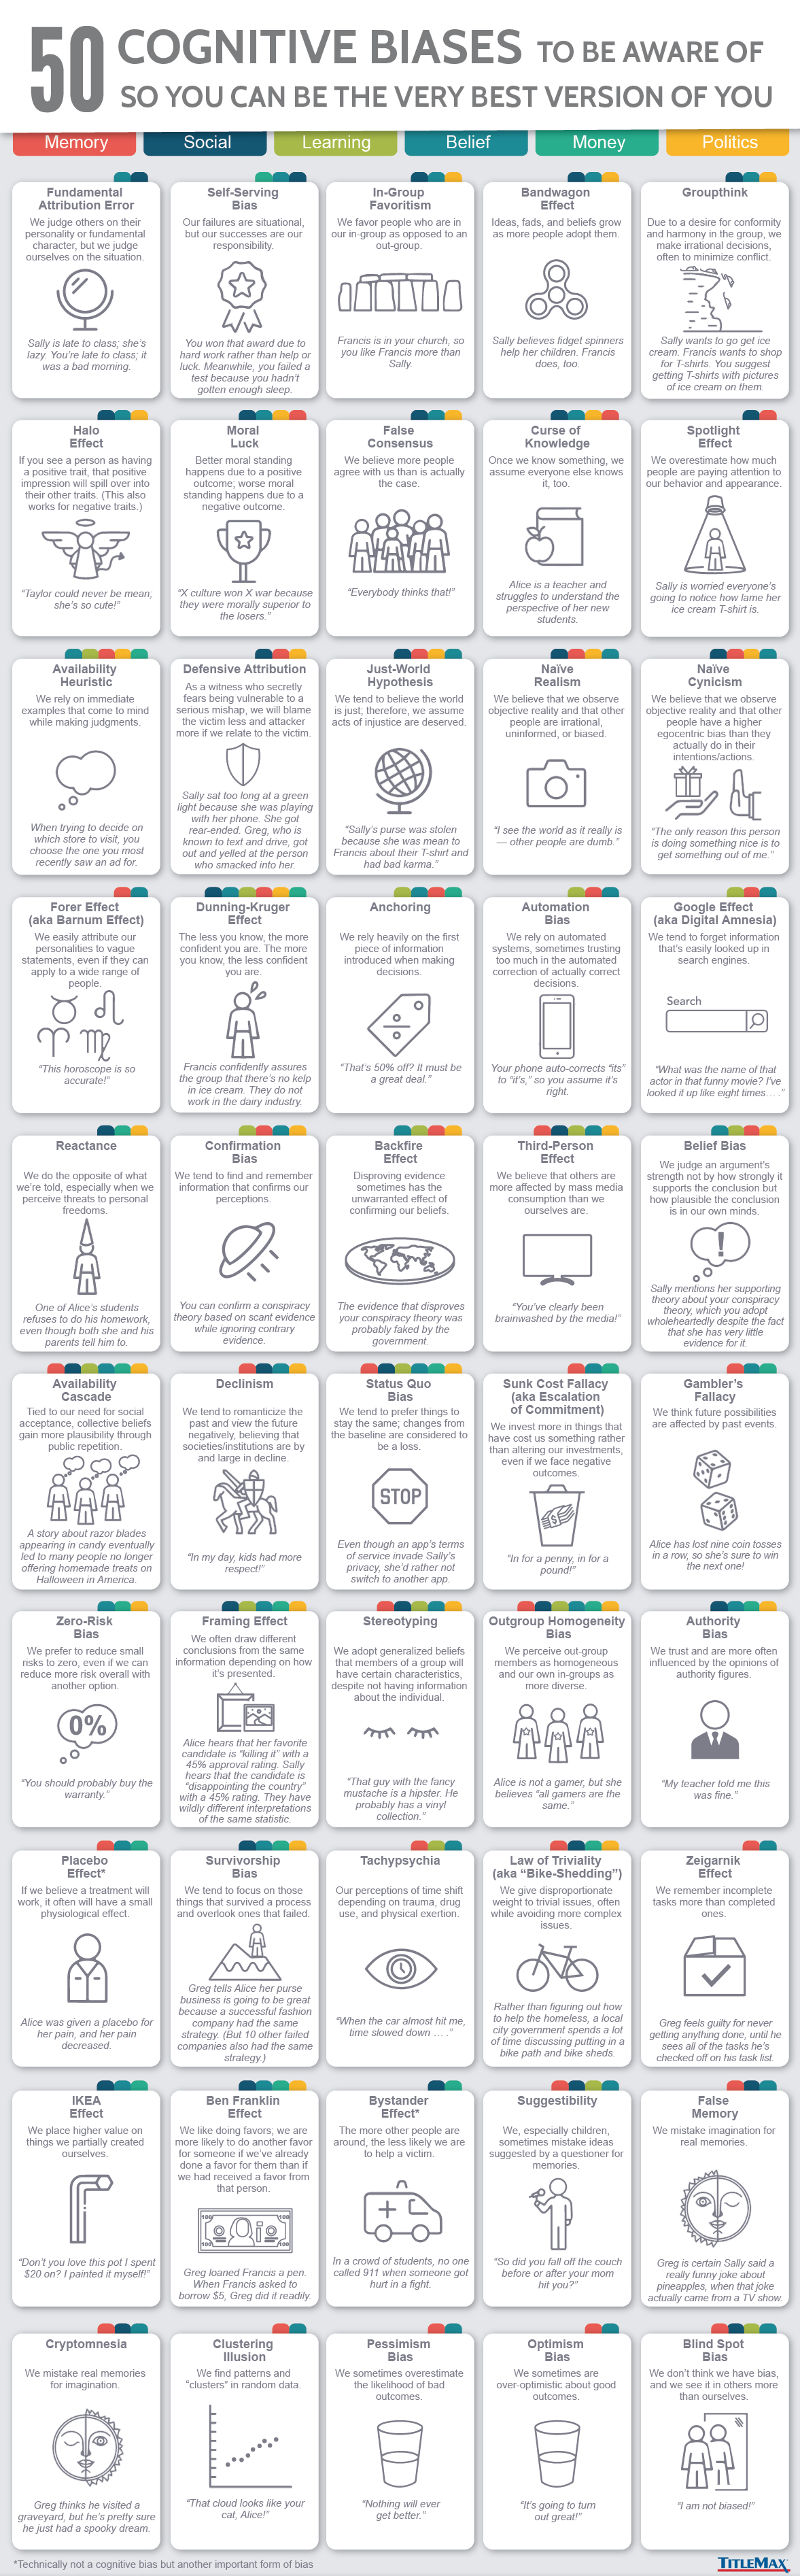 50 cognitive biases to be aware of